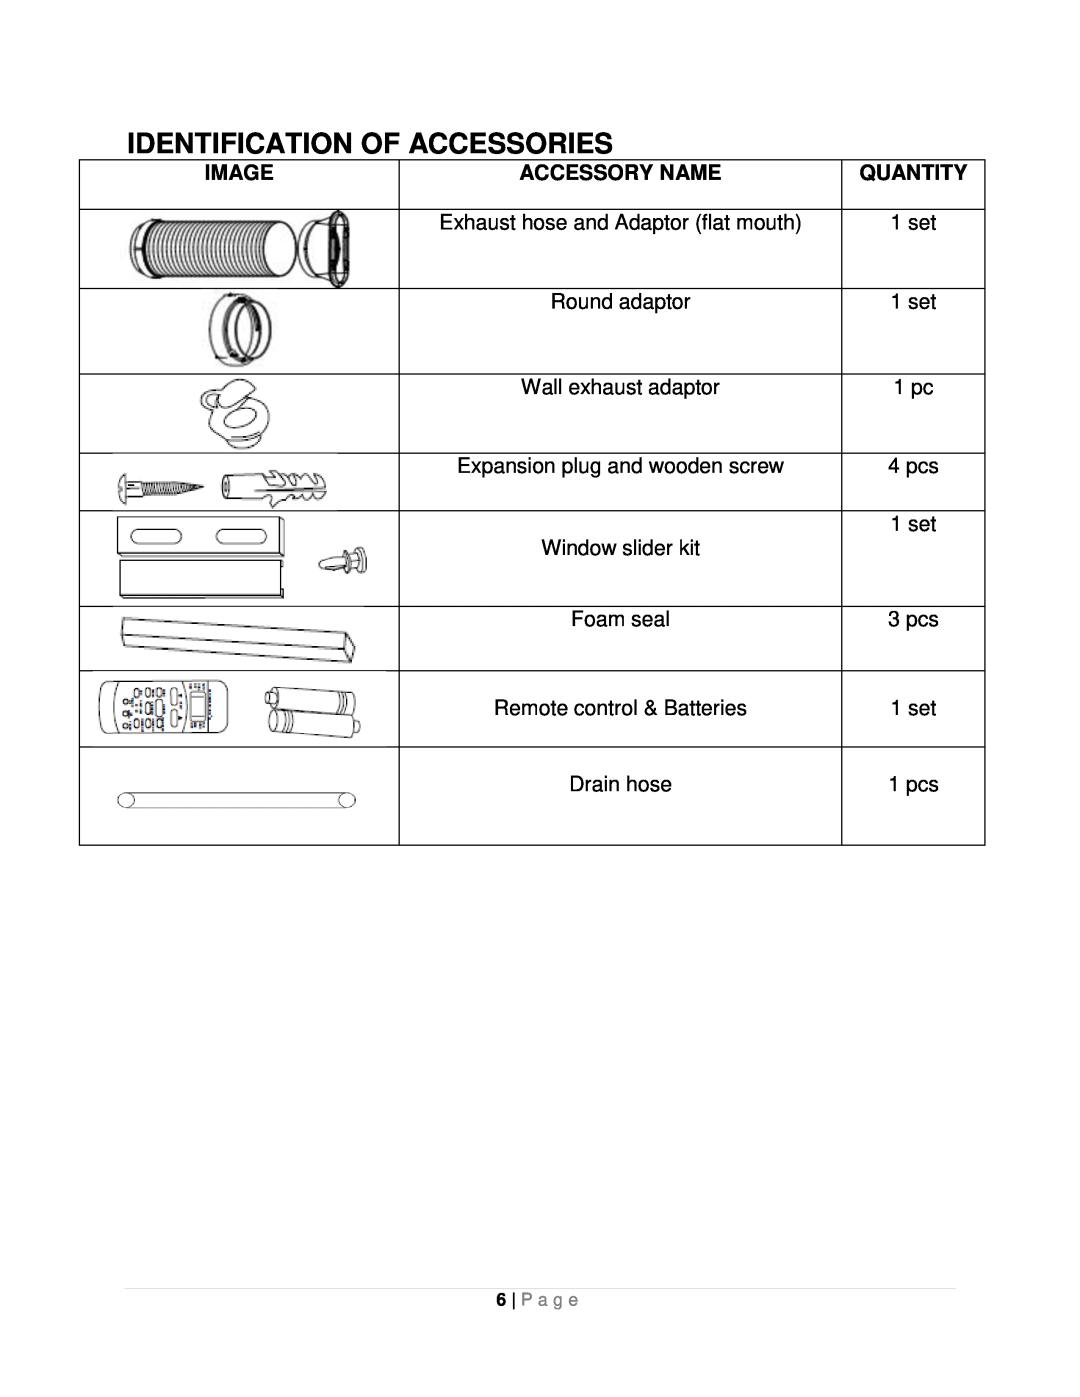 Whynter ARC-10WB instruction manual Identification Of Accessories, Image, Accessory Name, Quantity 